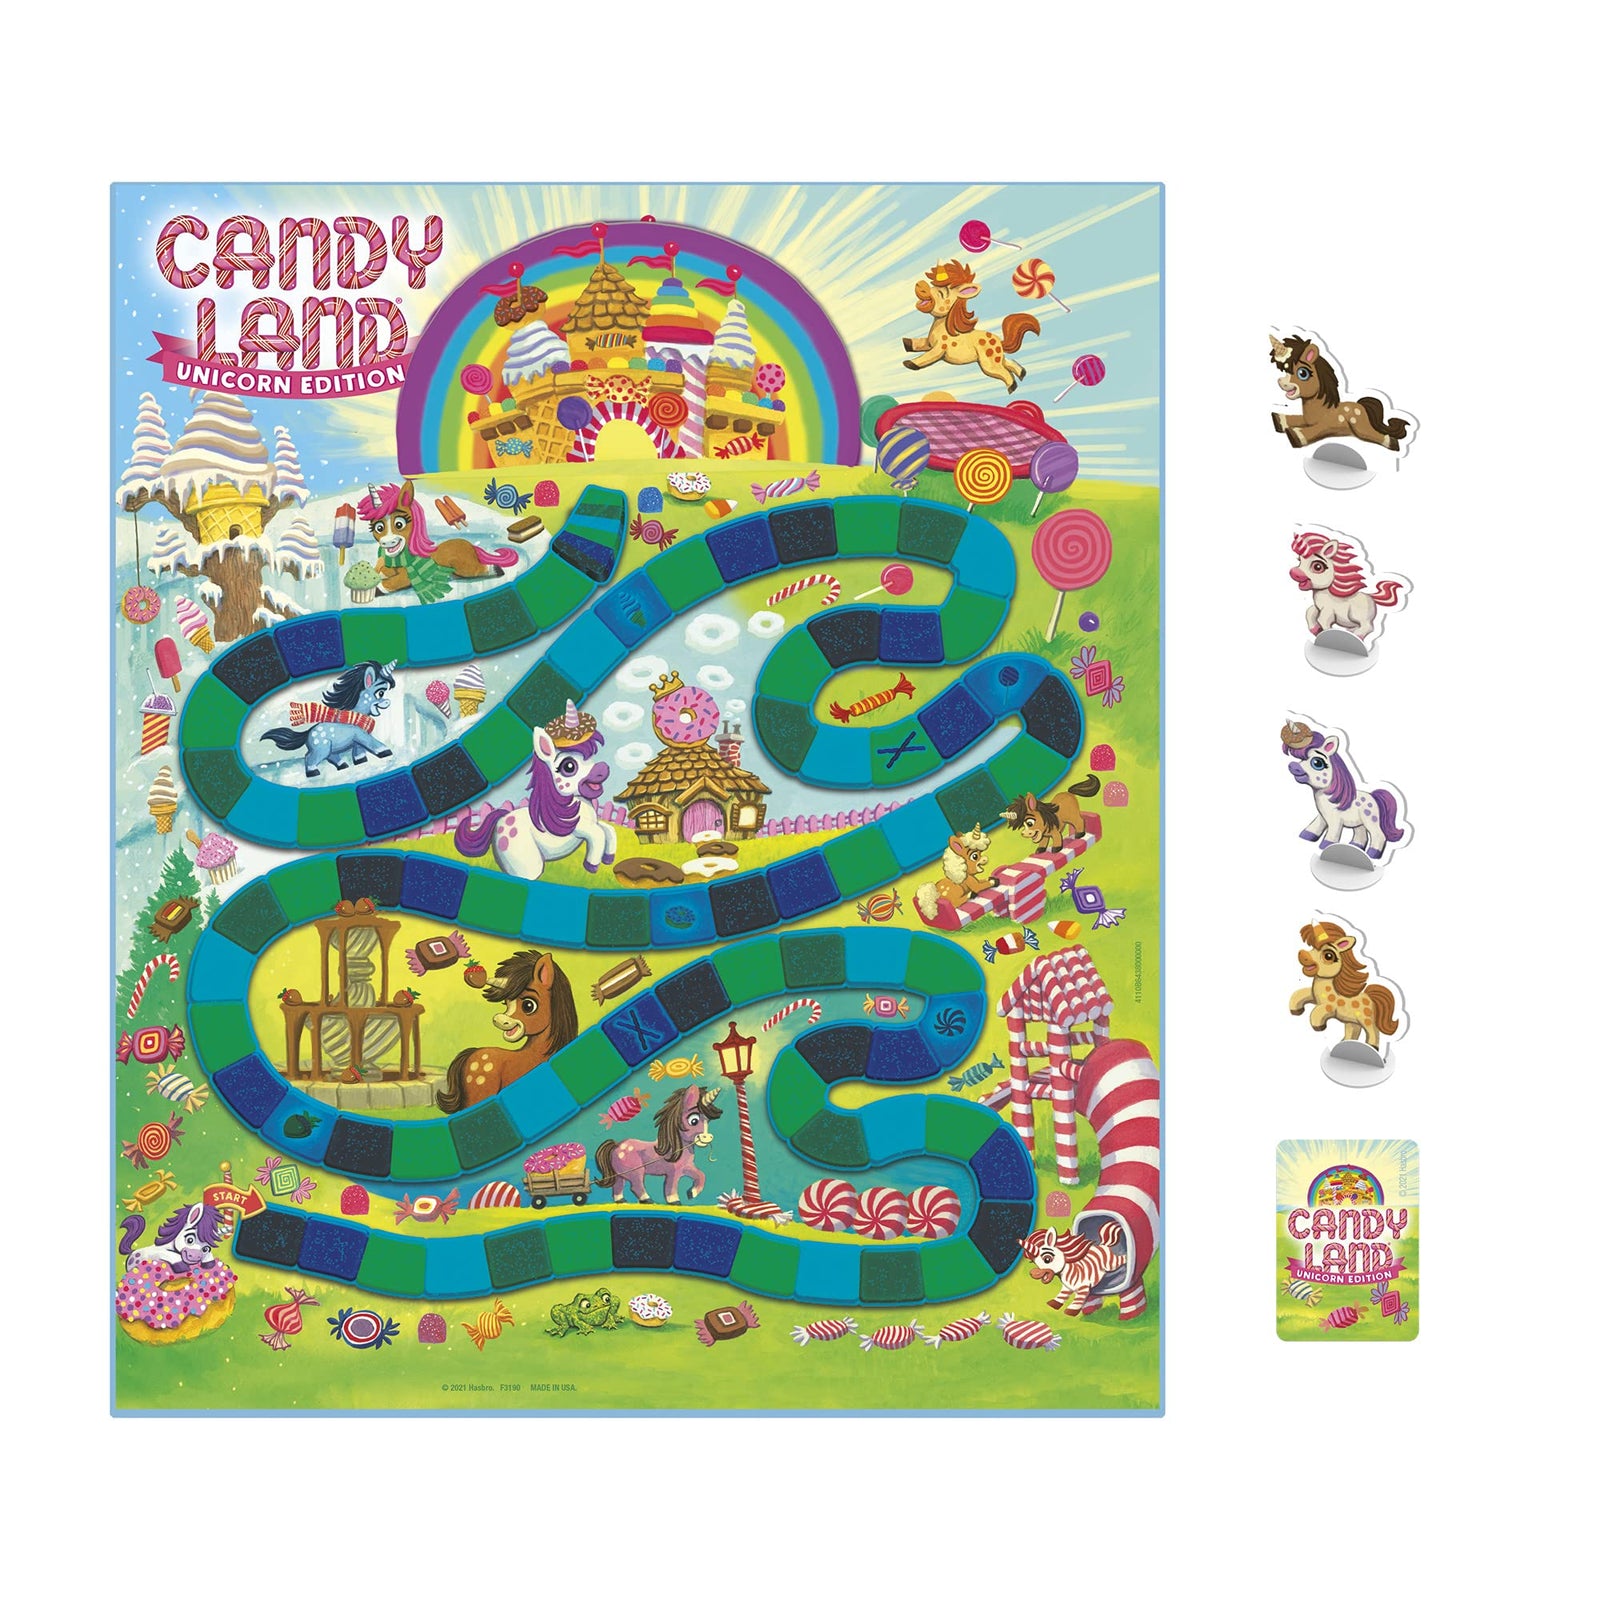 Candy Land Unicorn Edition Board Game, Preschool Game, No Reading Required Game for Young Children, Fun Game for Kids Ages 3 and Up (Amazon Exclusive)